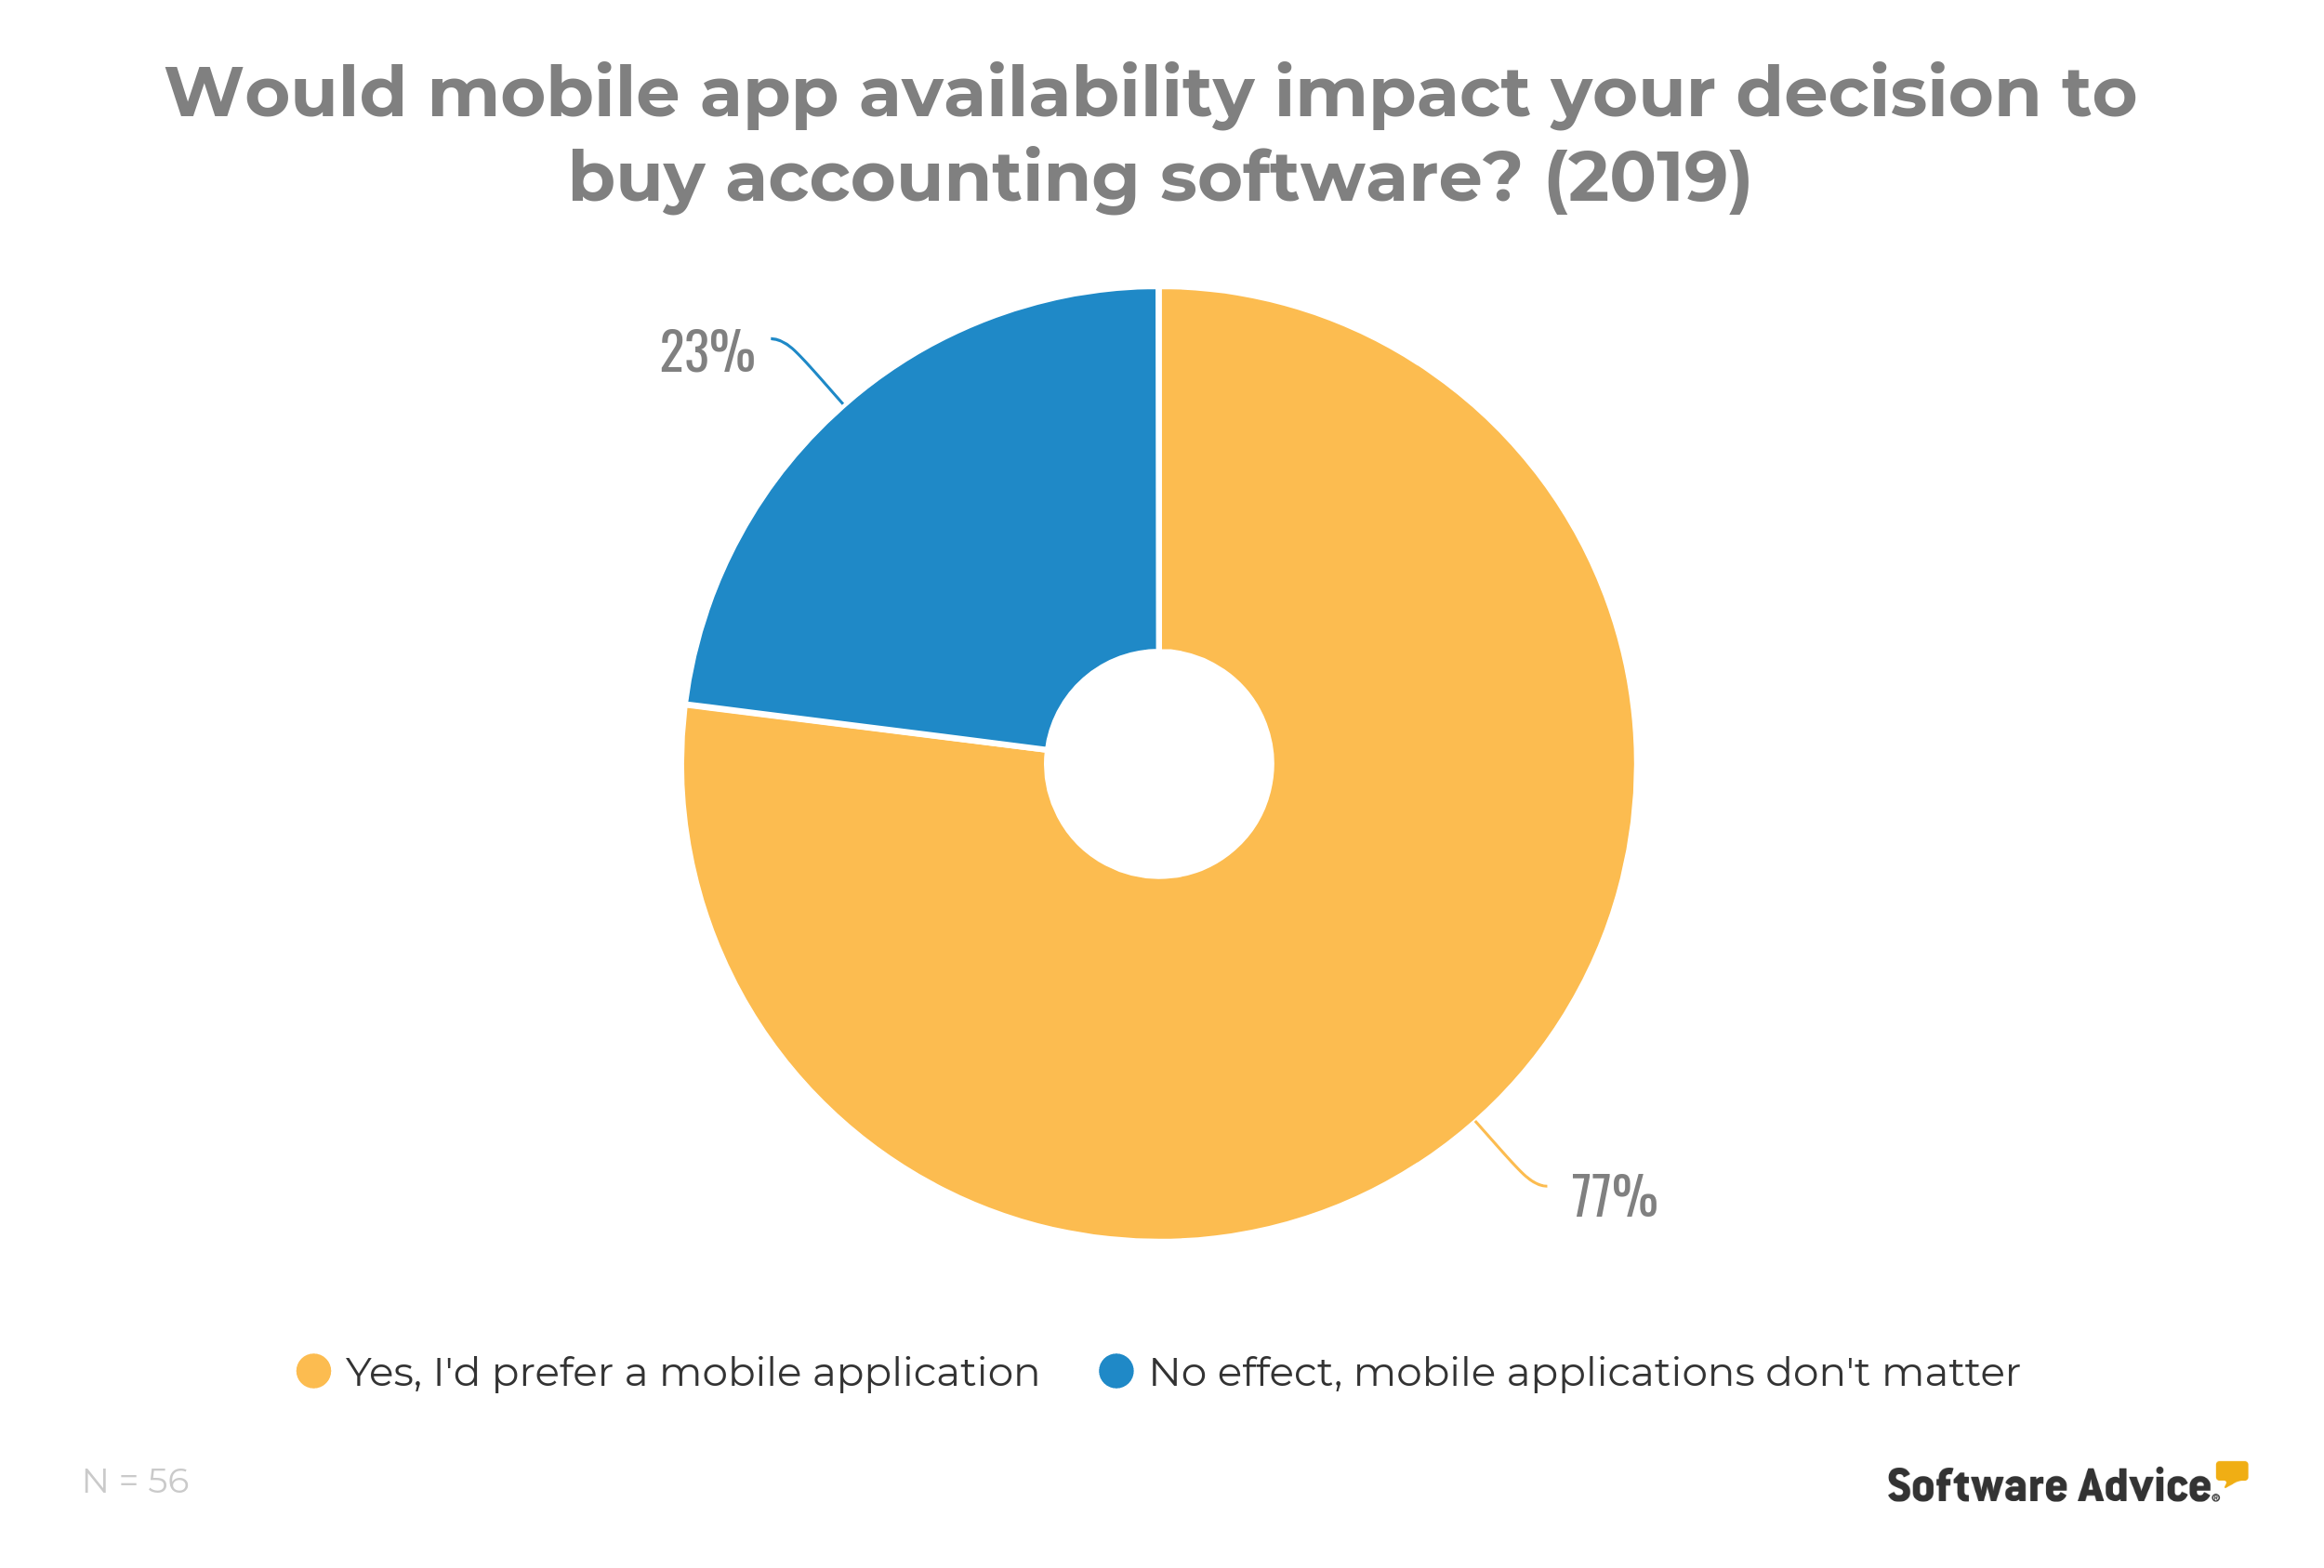 chart-showing-mobile-app-availability-affecting-accounting-software-purchase